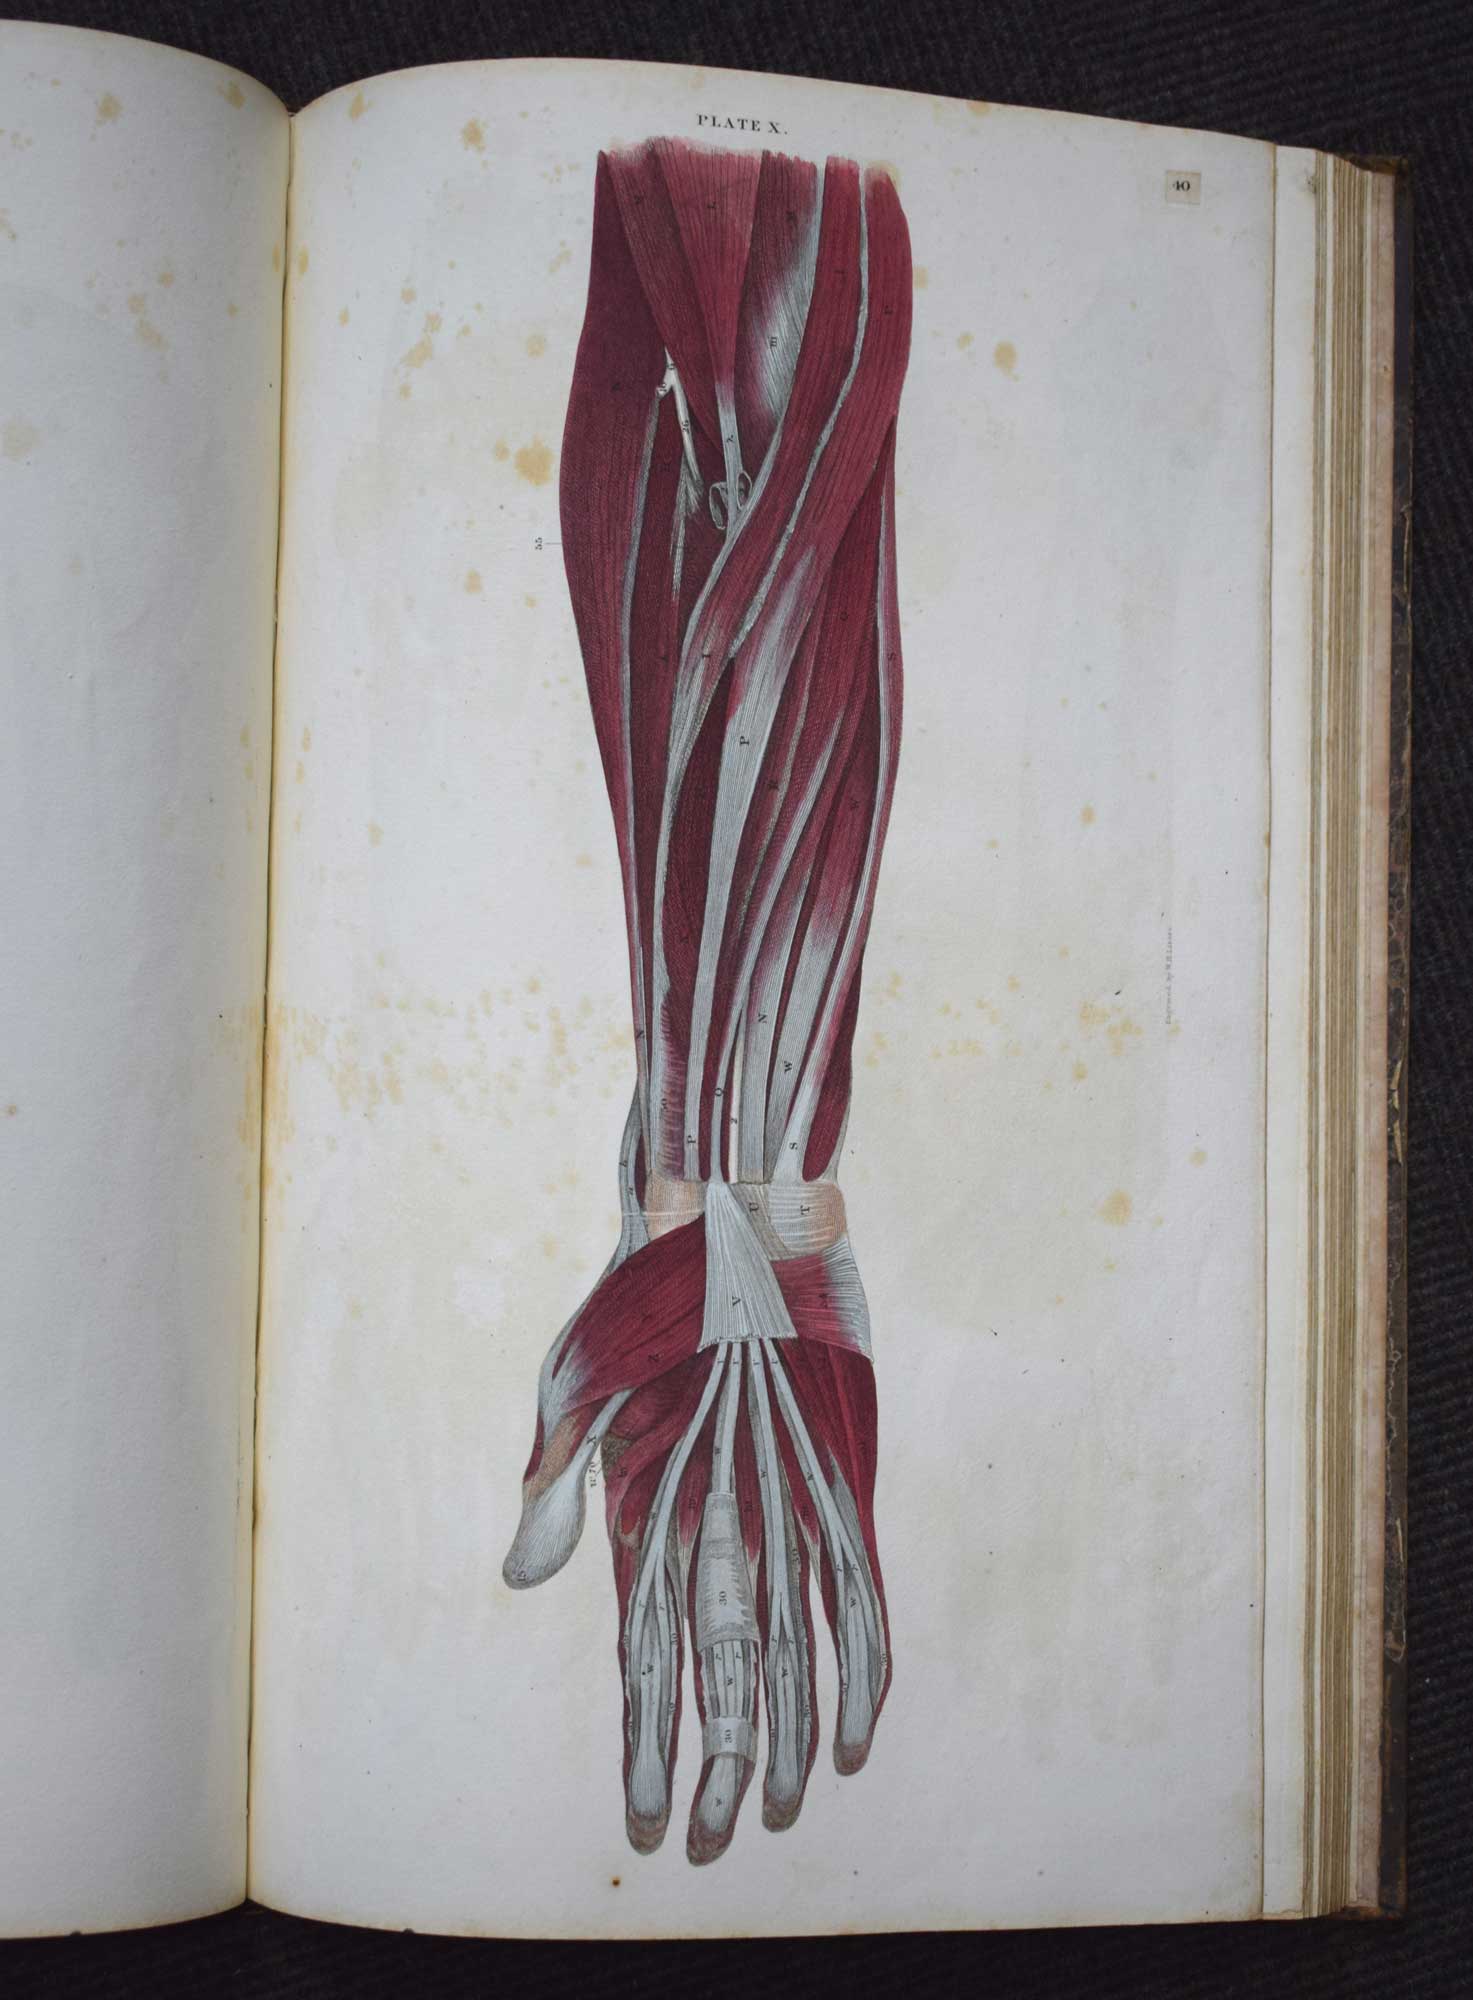 A System of Anatomical Plates of the Human Body, Accompanied with Descriptions, and Physiological, Pathological, and Surgical Observations.